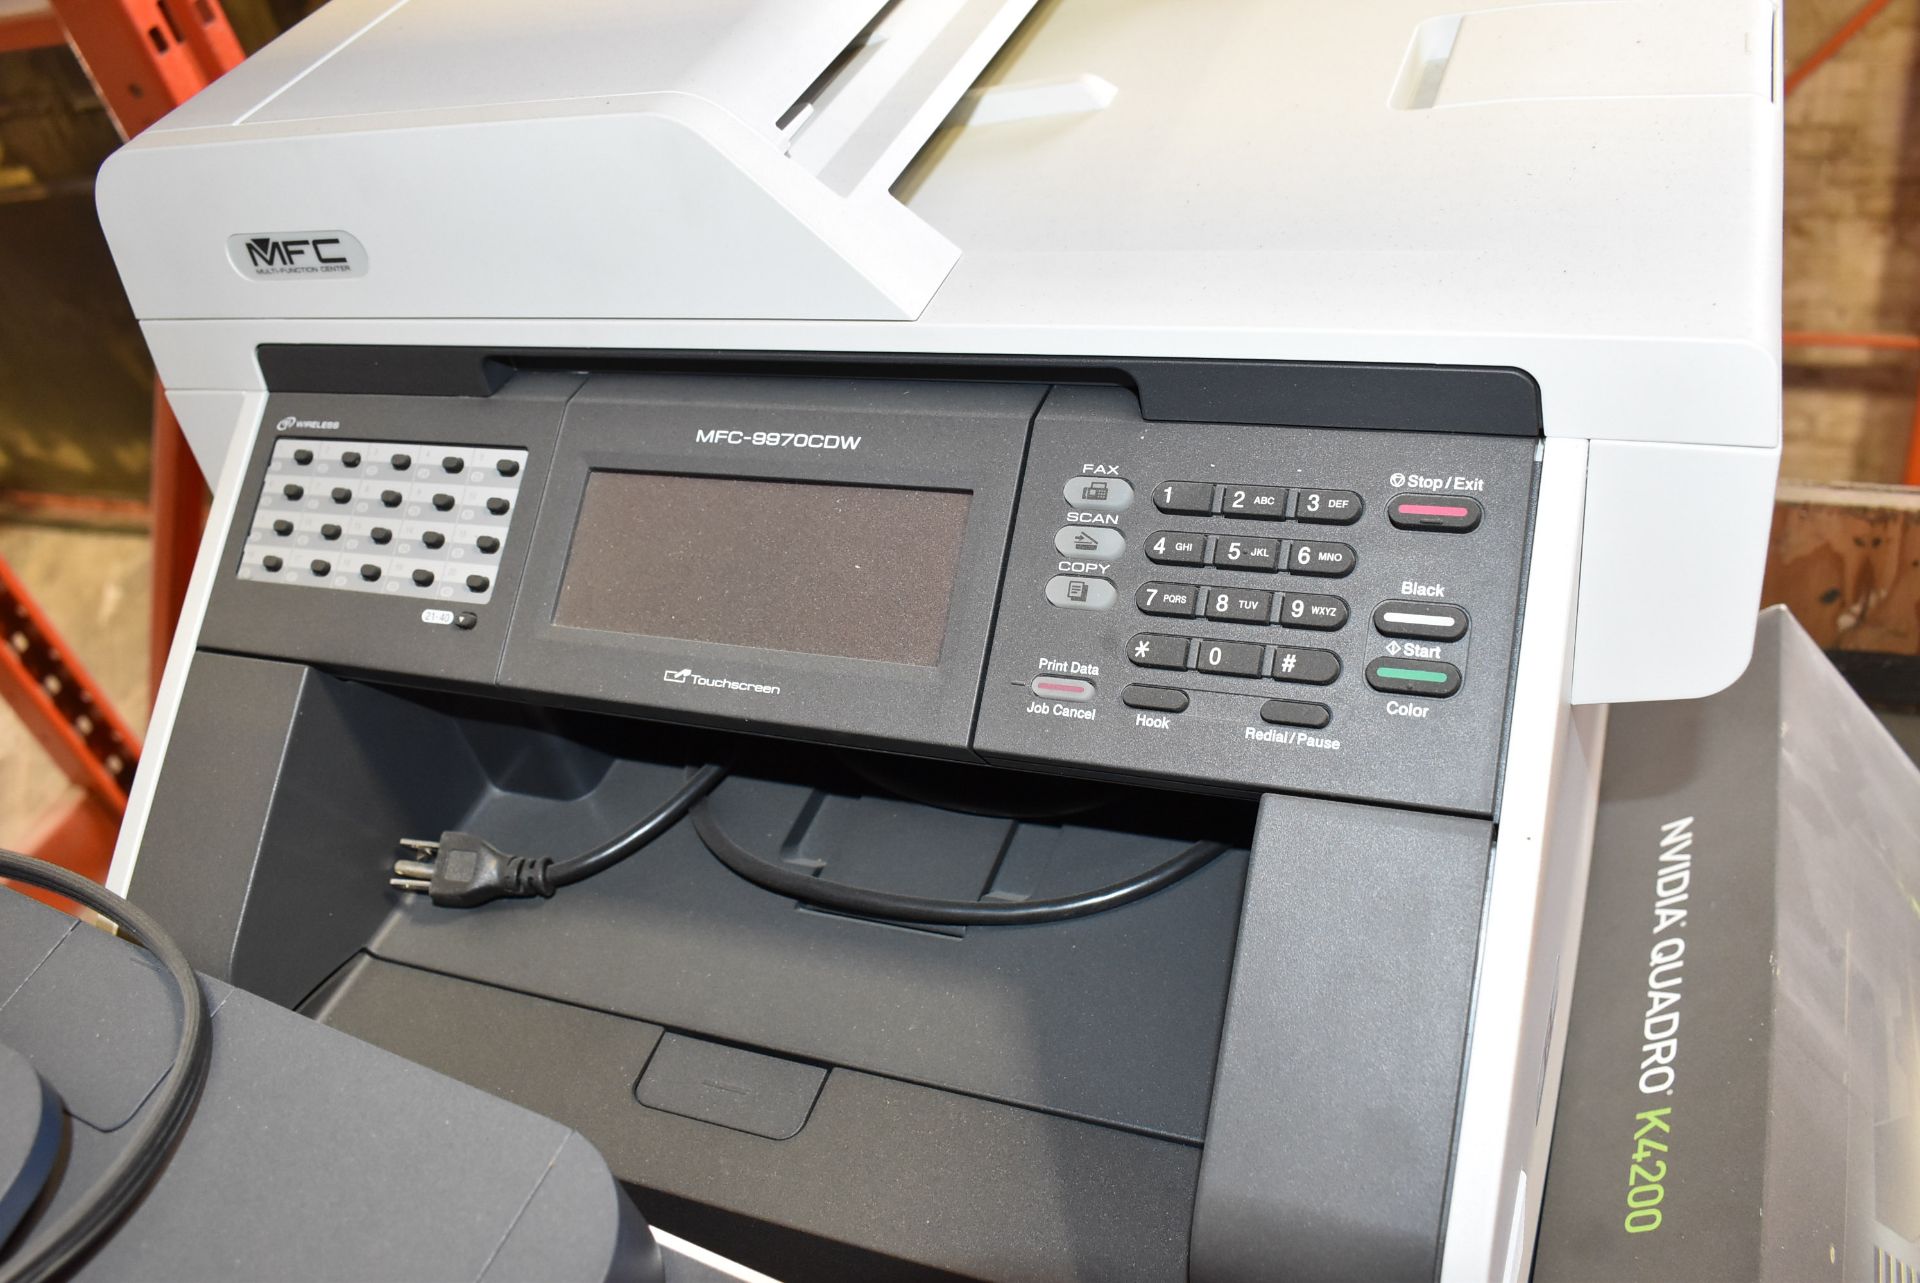 LOT/ BROTHER MFC-9970CDW COLOUR PRINTER, XEROX WORKCENTER 3335 MUTLIFUNCTION PRINTER, NVIDIA PC - Image 5 of 5